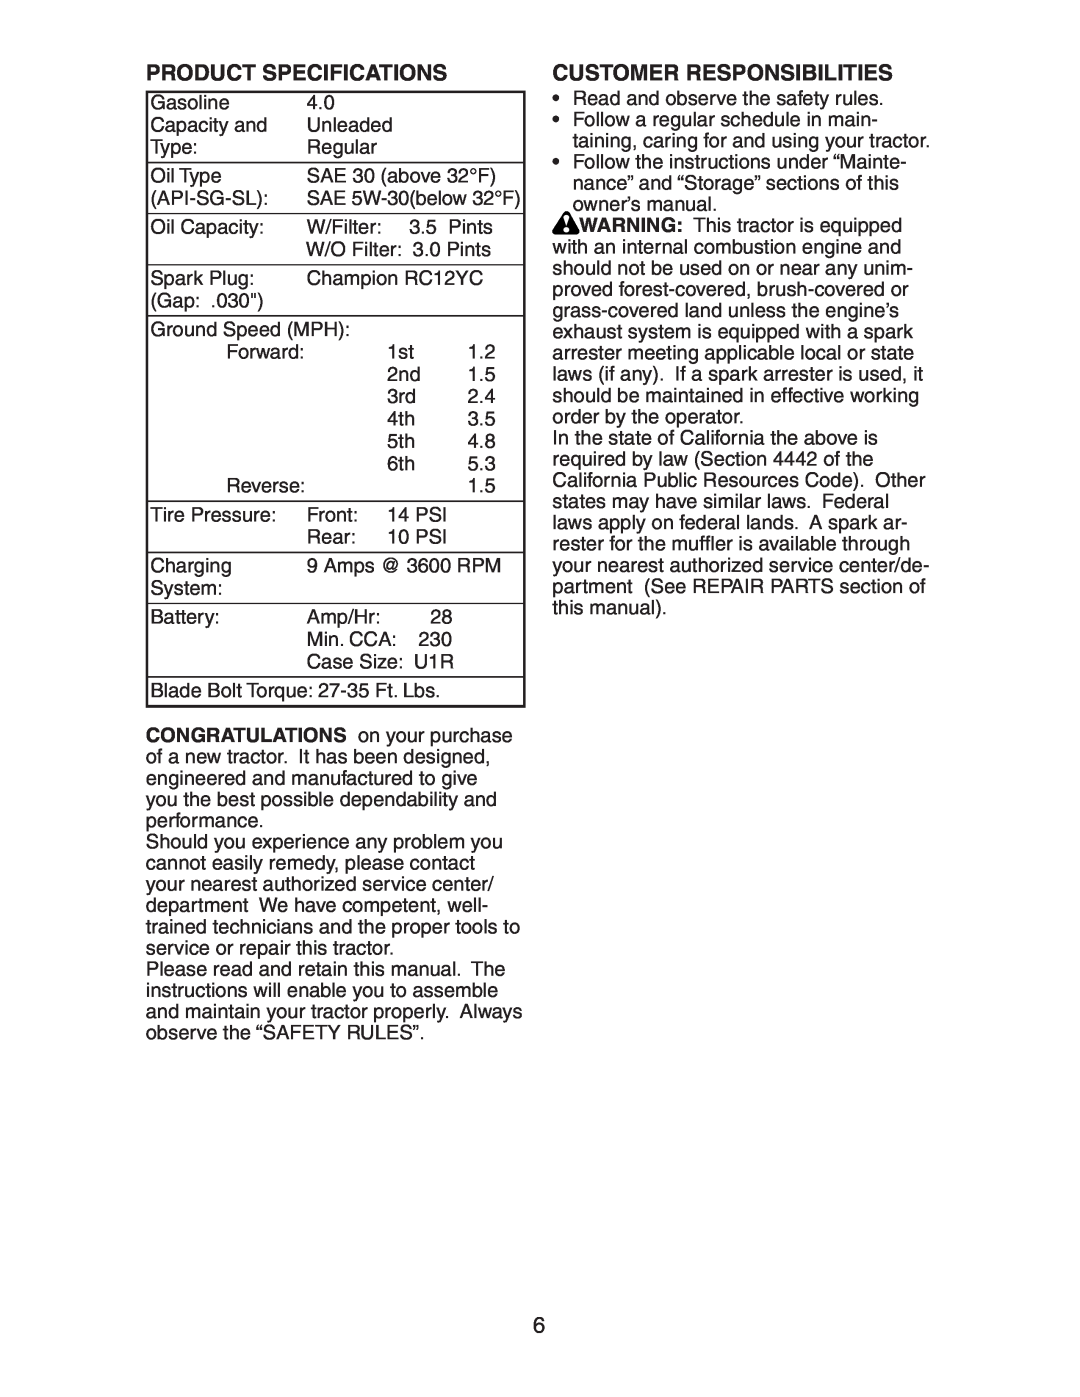 Poulan 192362 manual Product Specifications, Customer Responsibilities 